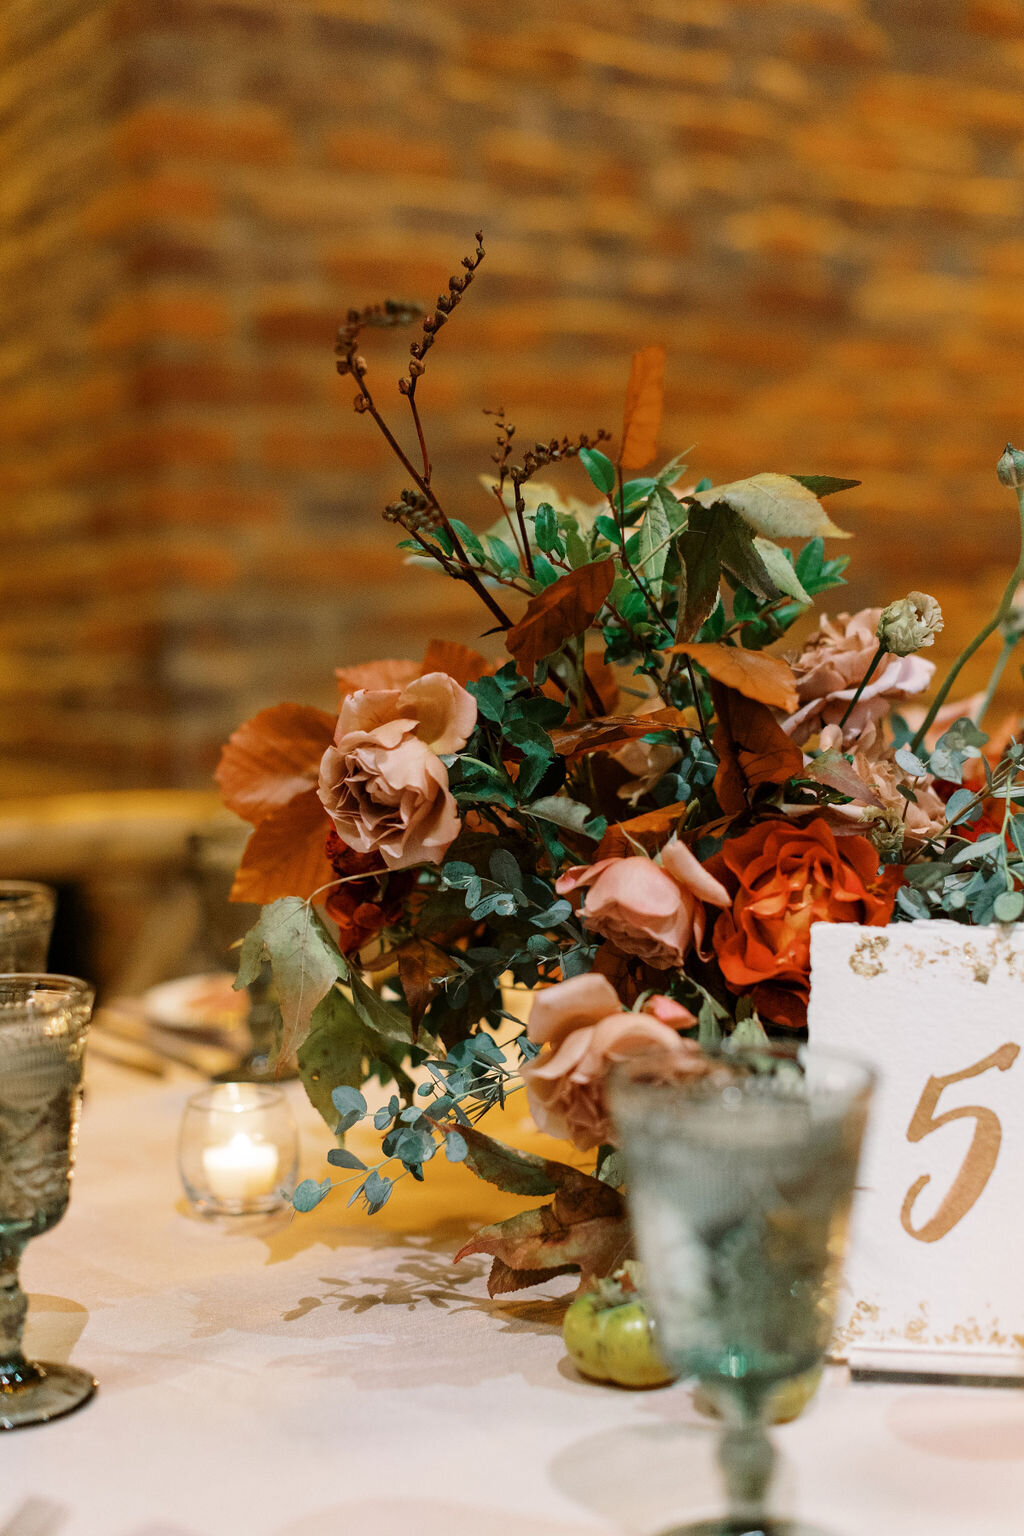 Lush floral centerpiece with autumnal tone flowers and textural elements including garden roses, fruiting branches, ranunculus, dahlias and fall foliage. Nashville wedding florist at Clementine Hall.